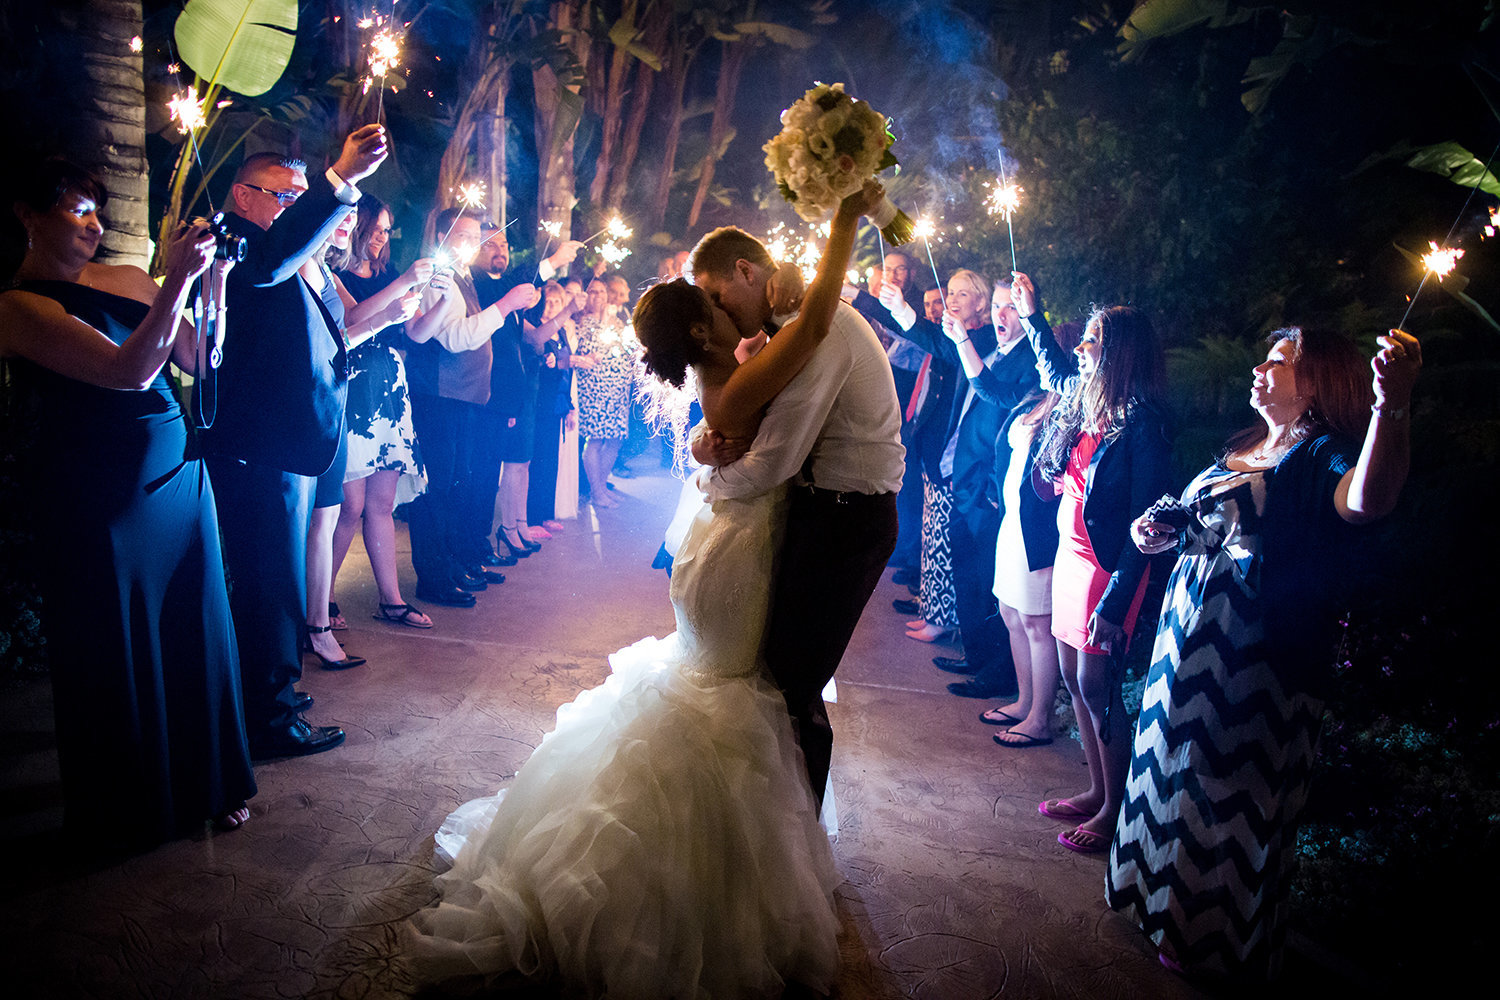 Amazing grand exit photo with sparklers of the bride and groom